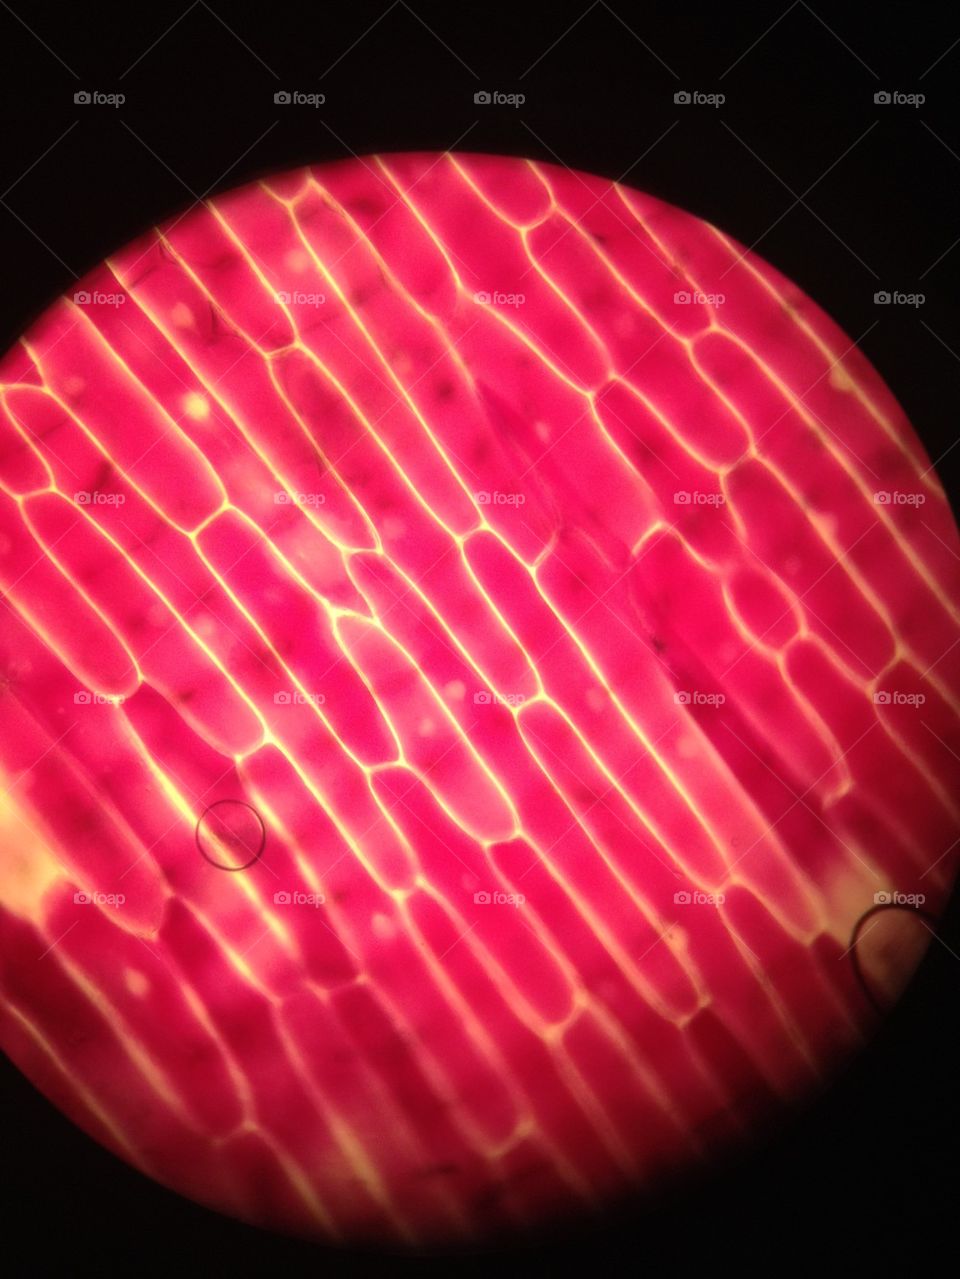 red onion cells